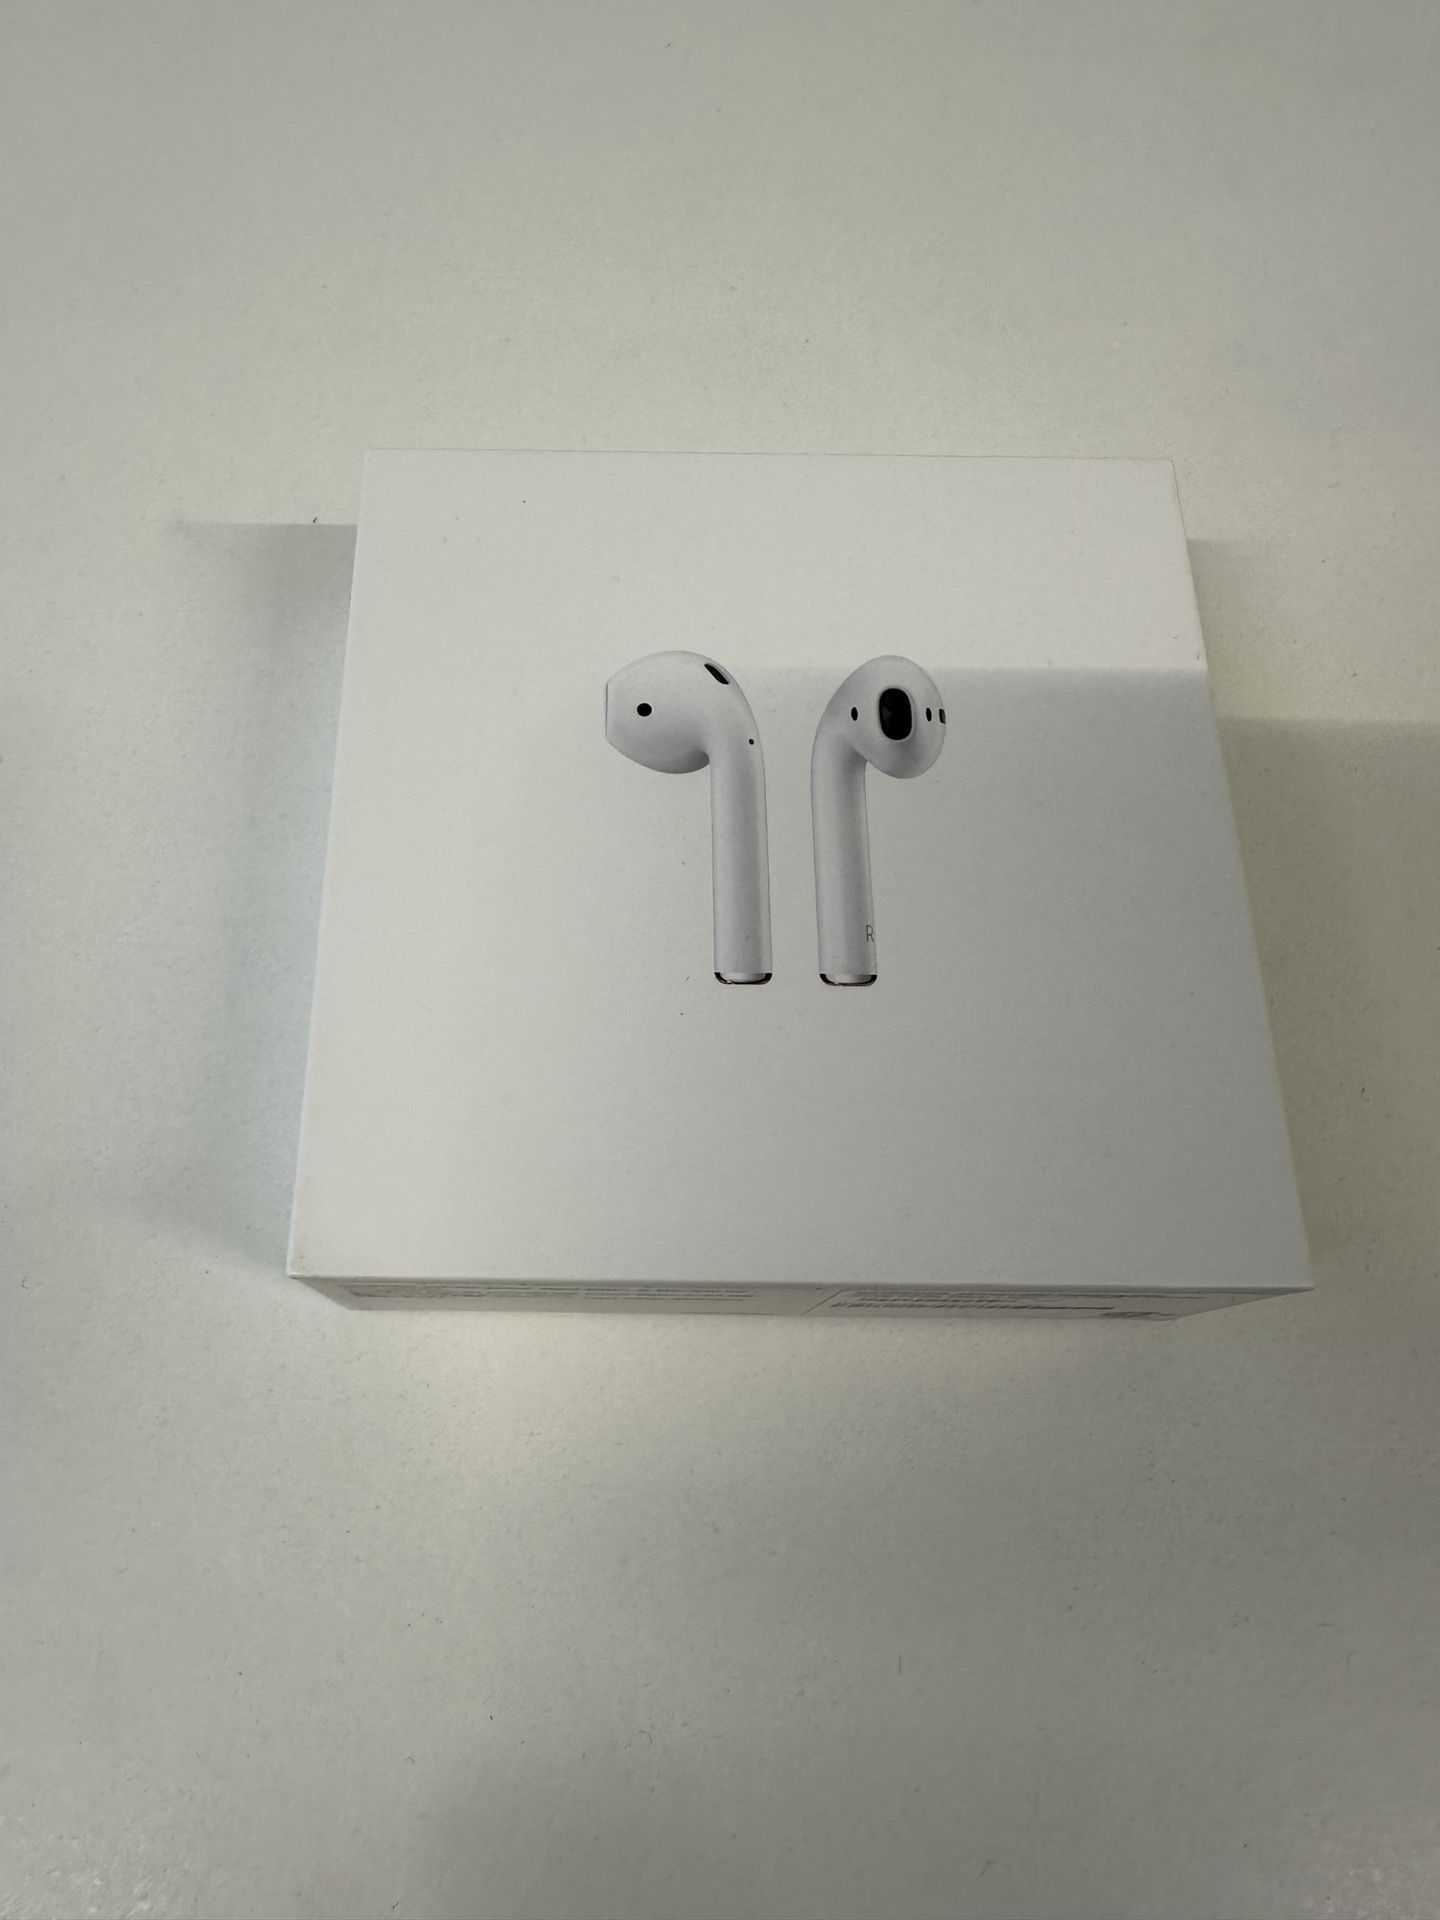 Apple, AirPods, 2nd Generation